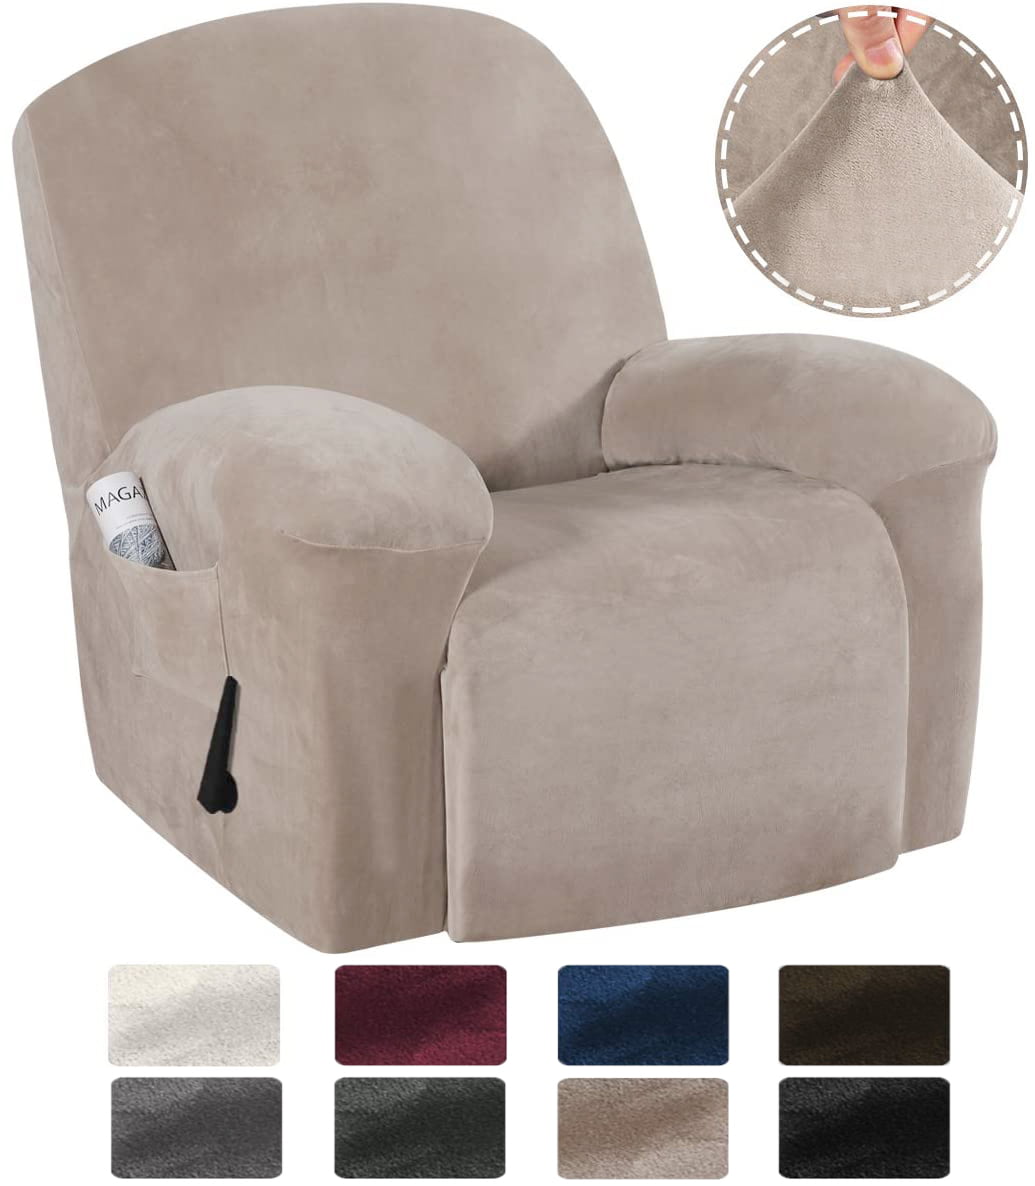 Stretch Water Repellent Recliner Chair Cover Recliner Cover Recliner Slipcver with Side Pocket Pets / Dogs Friendly Off White Soft Suede Fabric Form Fit for Standard / Oversized Reclining Chair